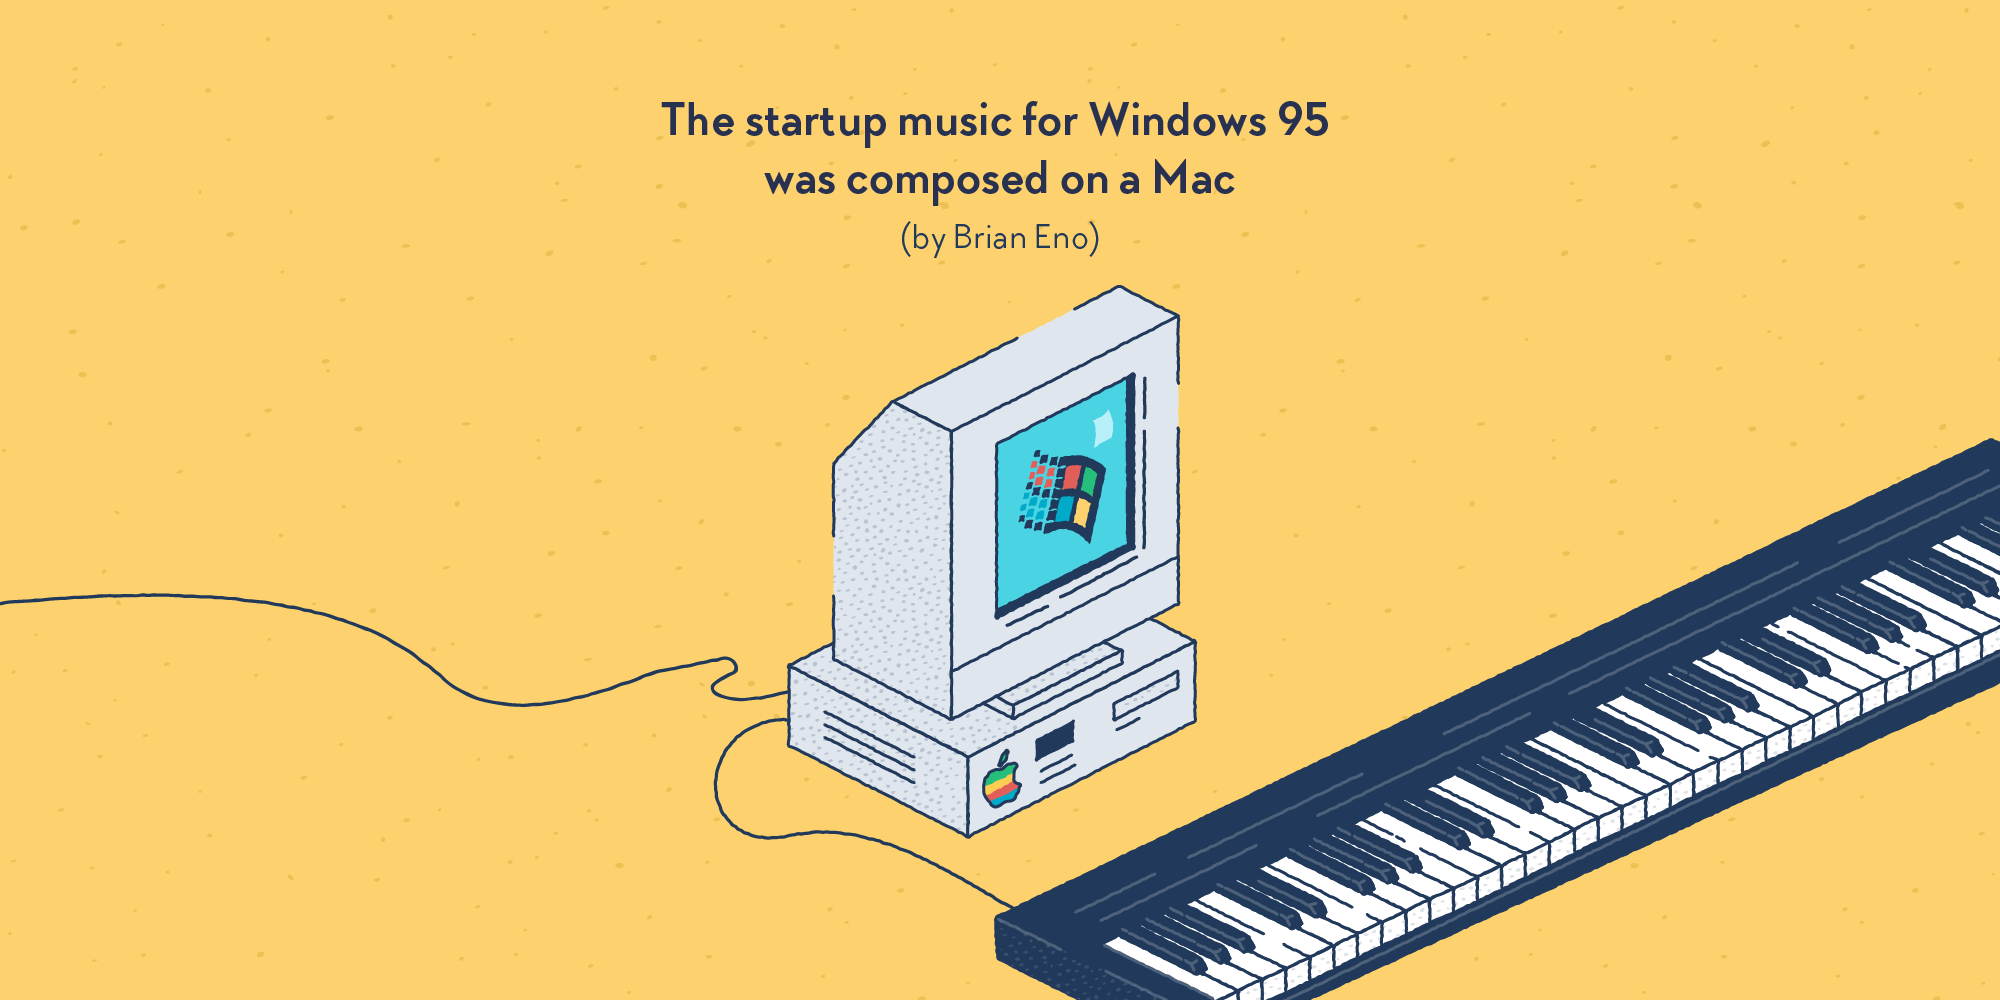 A Macintosh computer from the nineties, on which is plugged a music keyboard. The Windows 95 startup screen is shown on the monitor.